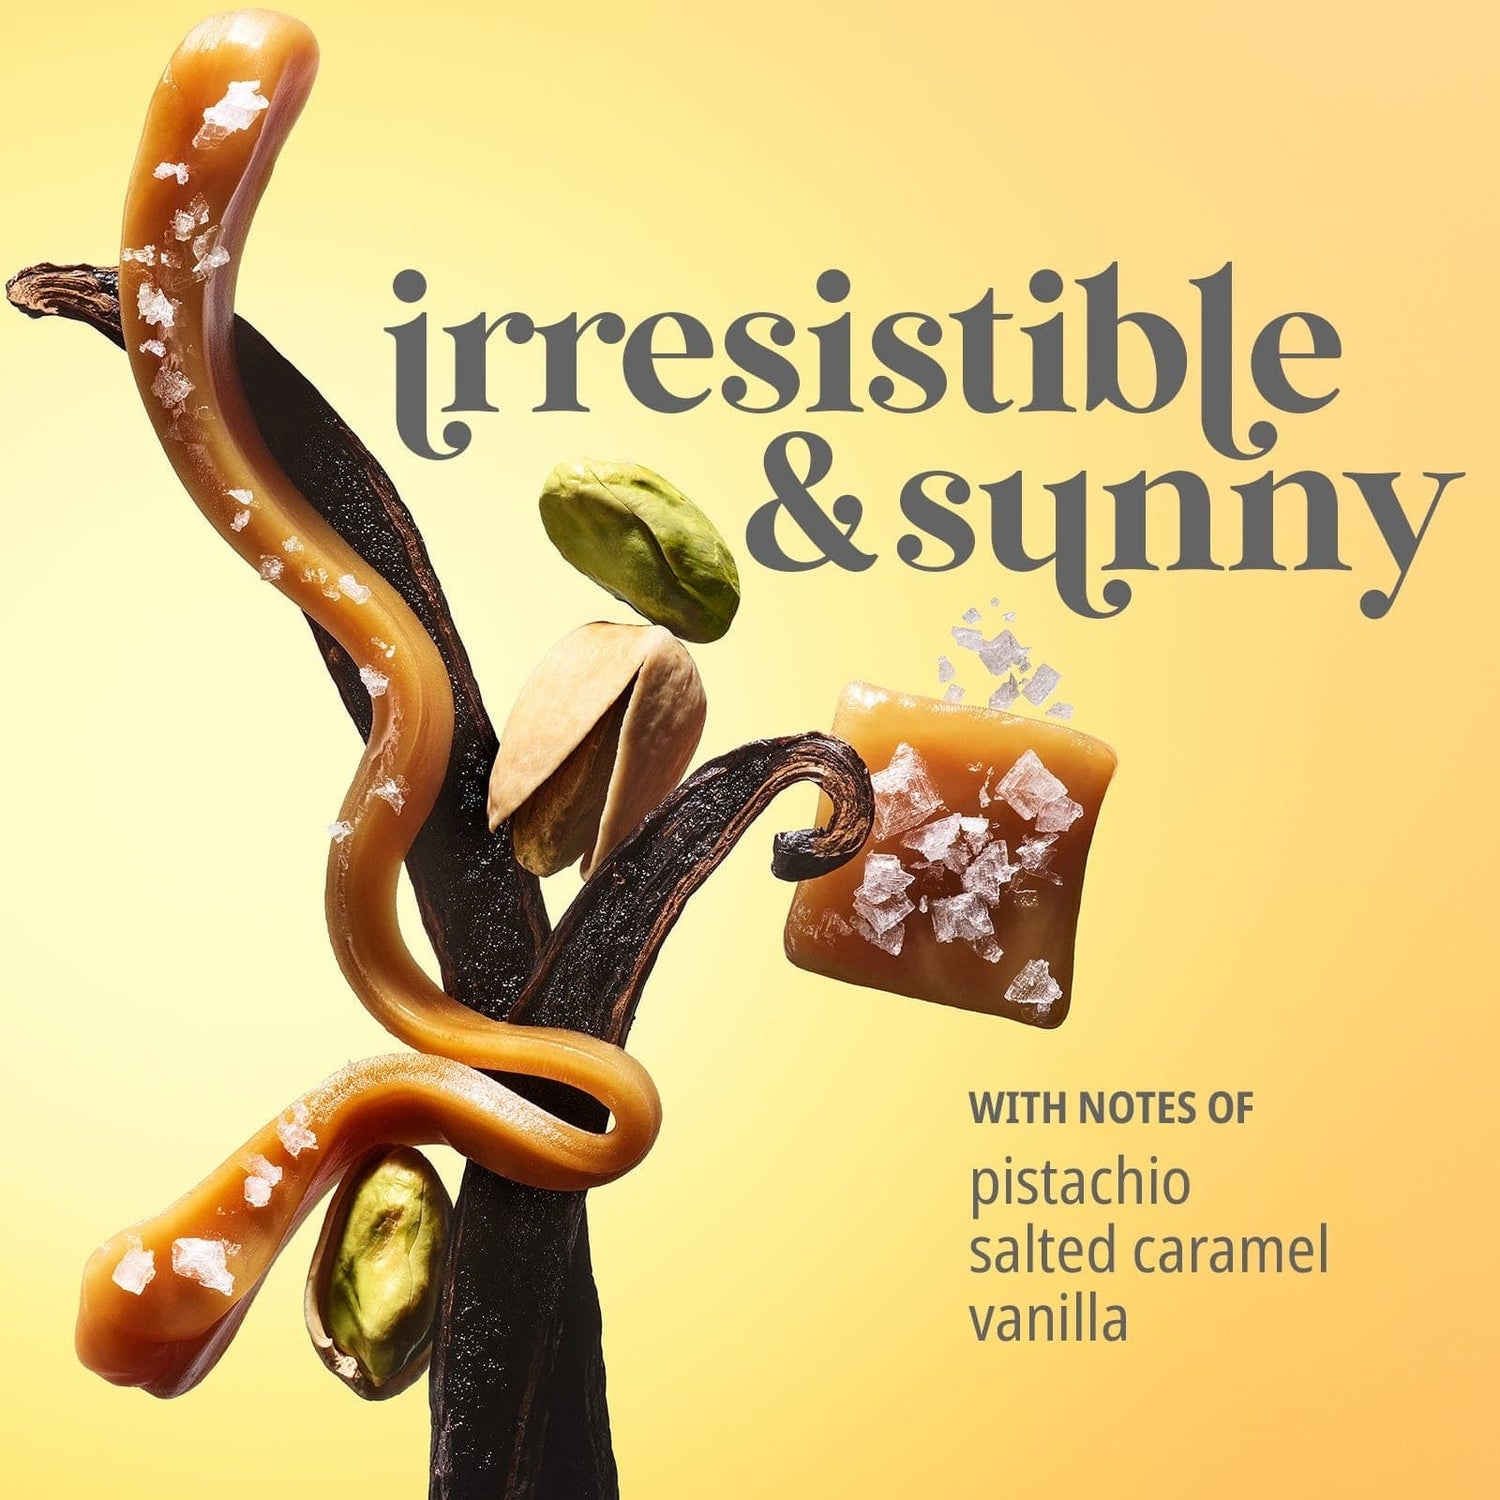 Irresistible &amp; sunny, with notes of pistachio, salted caramel and vanilla